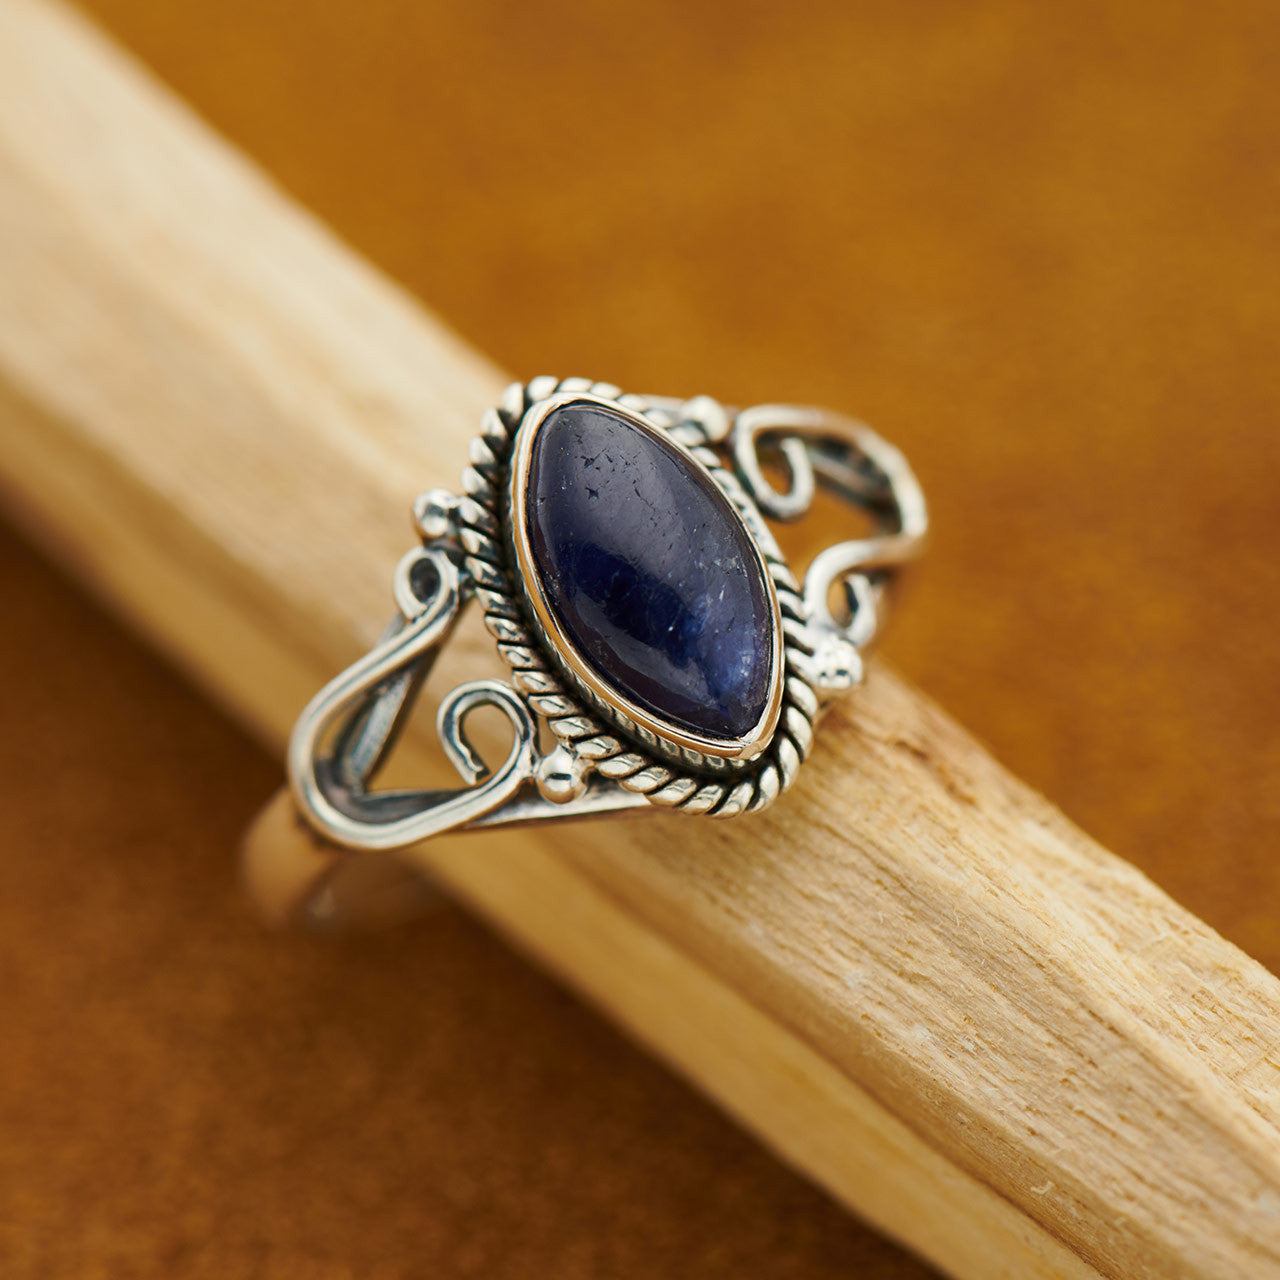 Metaphysical properties of Blue Sapphire stone: Apart from physical properties the Blue Sapphire stone is quite famous for containing celestial forces. It is said that the beneficial Blue Sapphire stone is attached with Saturn and carries the enormous or splendid powers of Saturn.